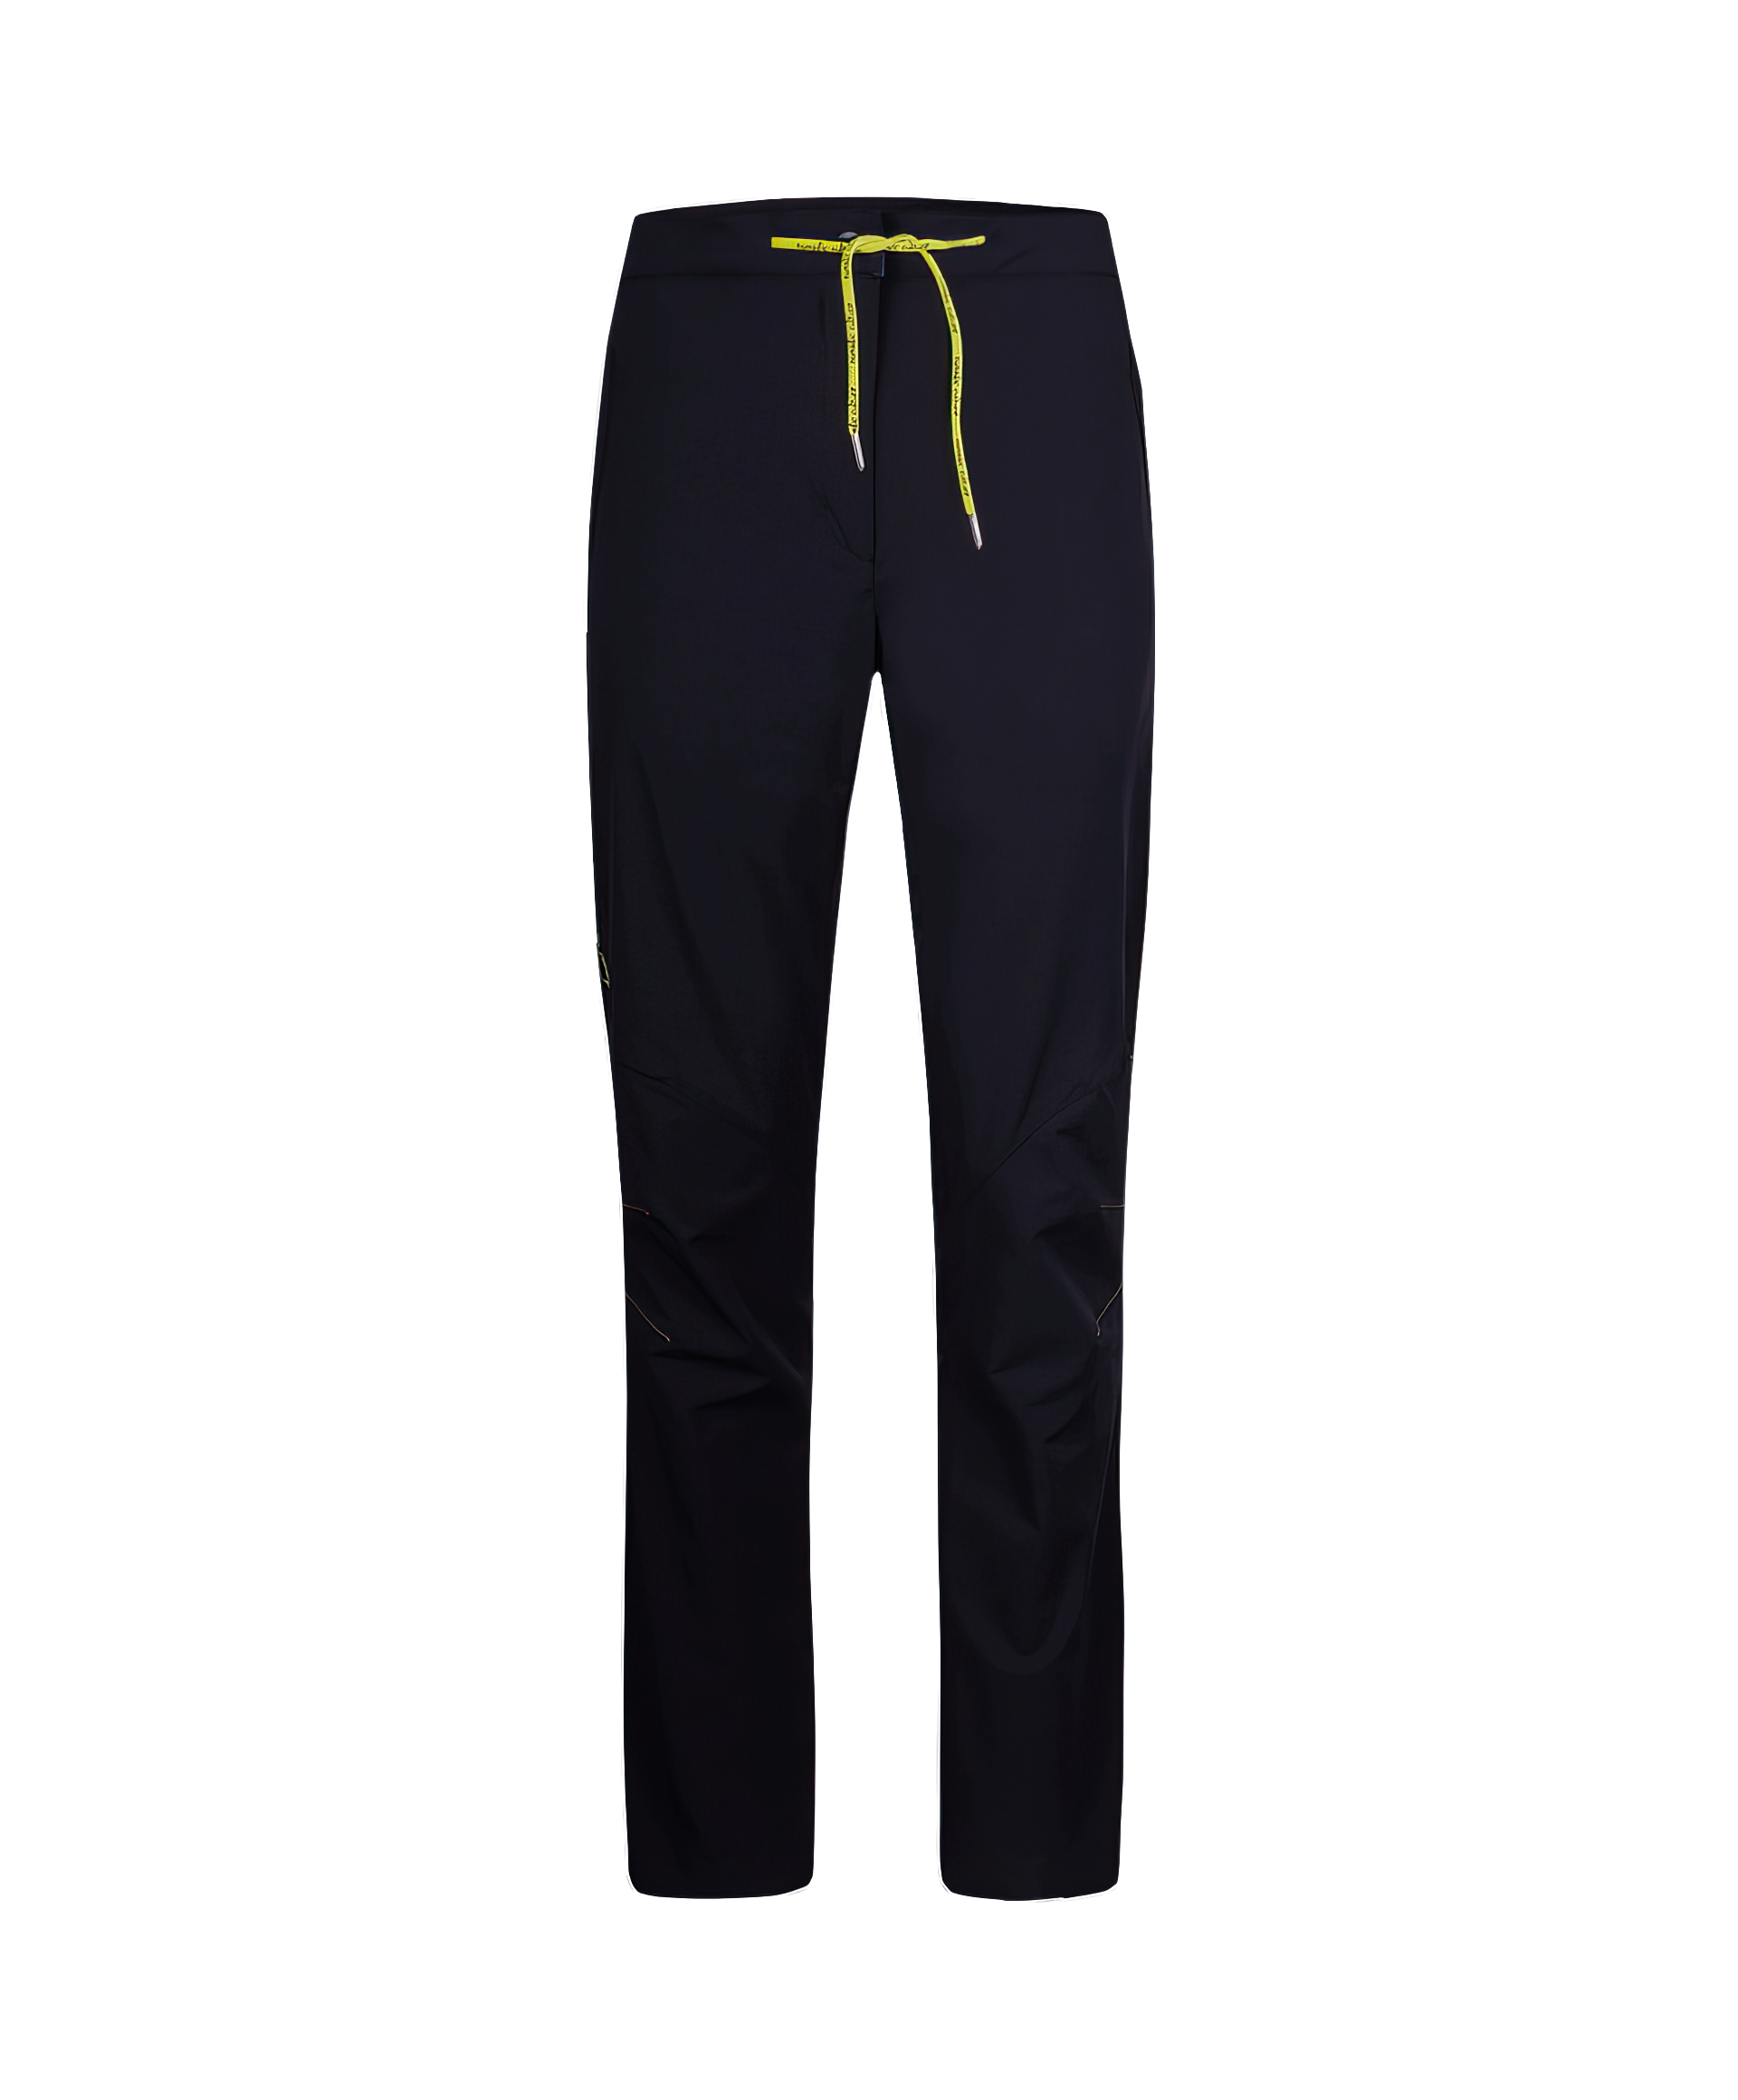 Akna comfit pants black from MAYA MAYA are highly breathable for women on their hikes.